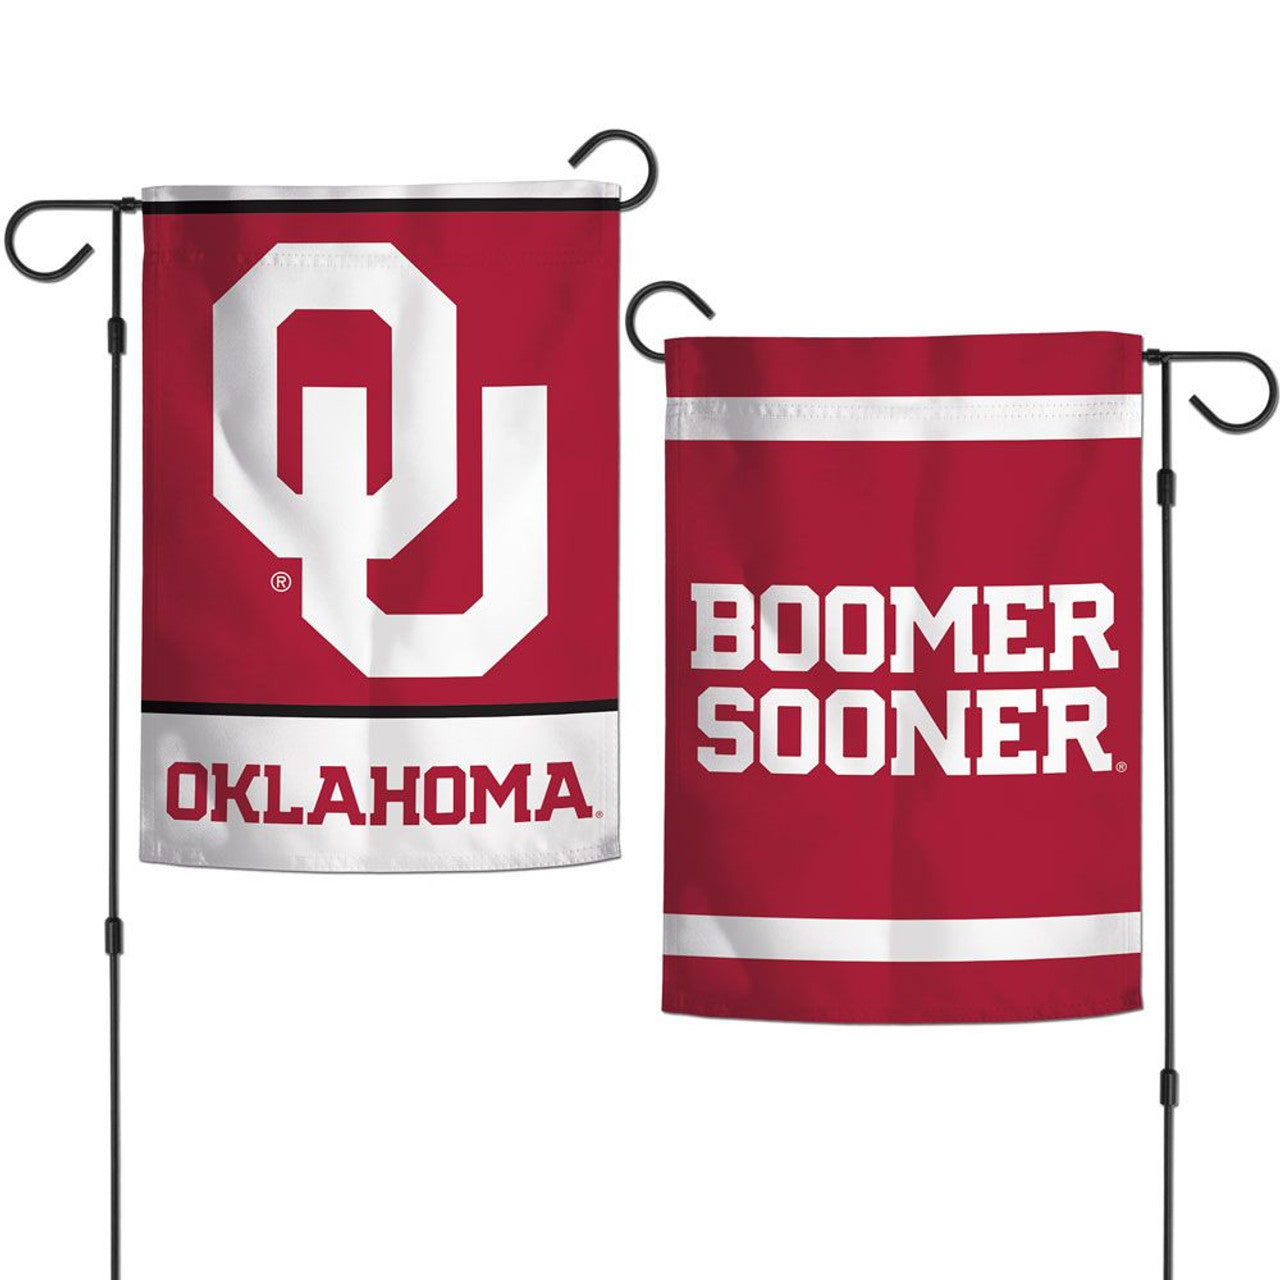 Oklahoma Sooners 12x18 Garden Flag 2 Sided by Wincraft